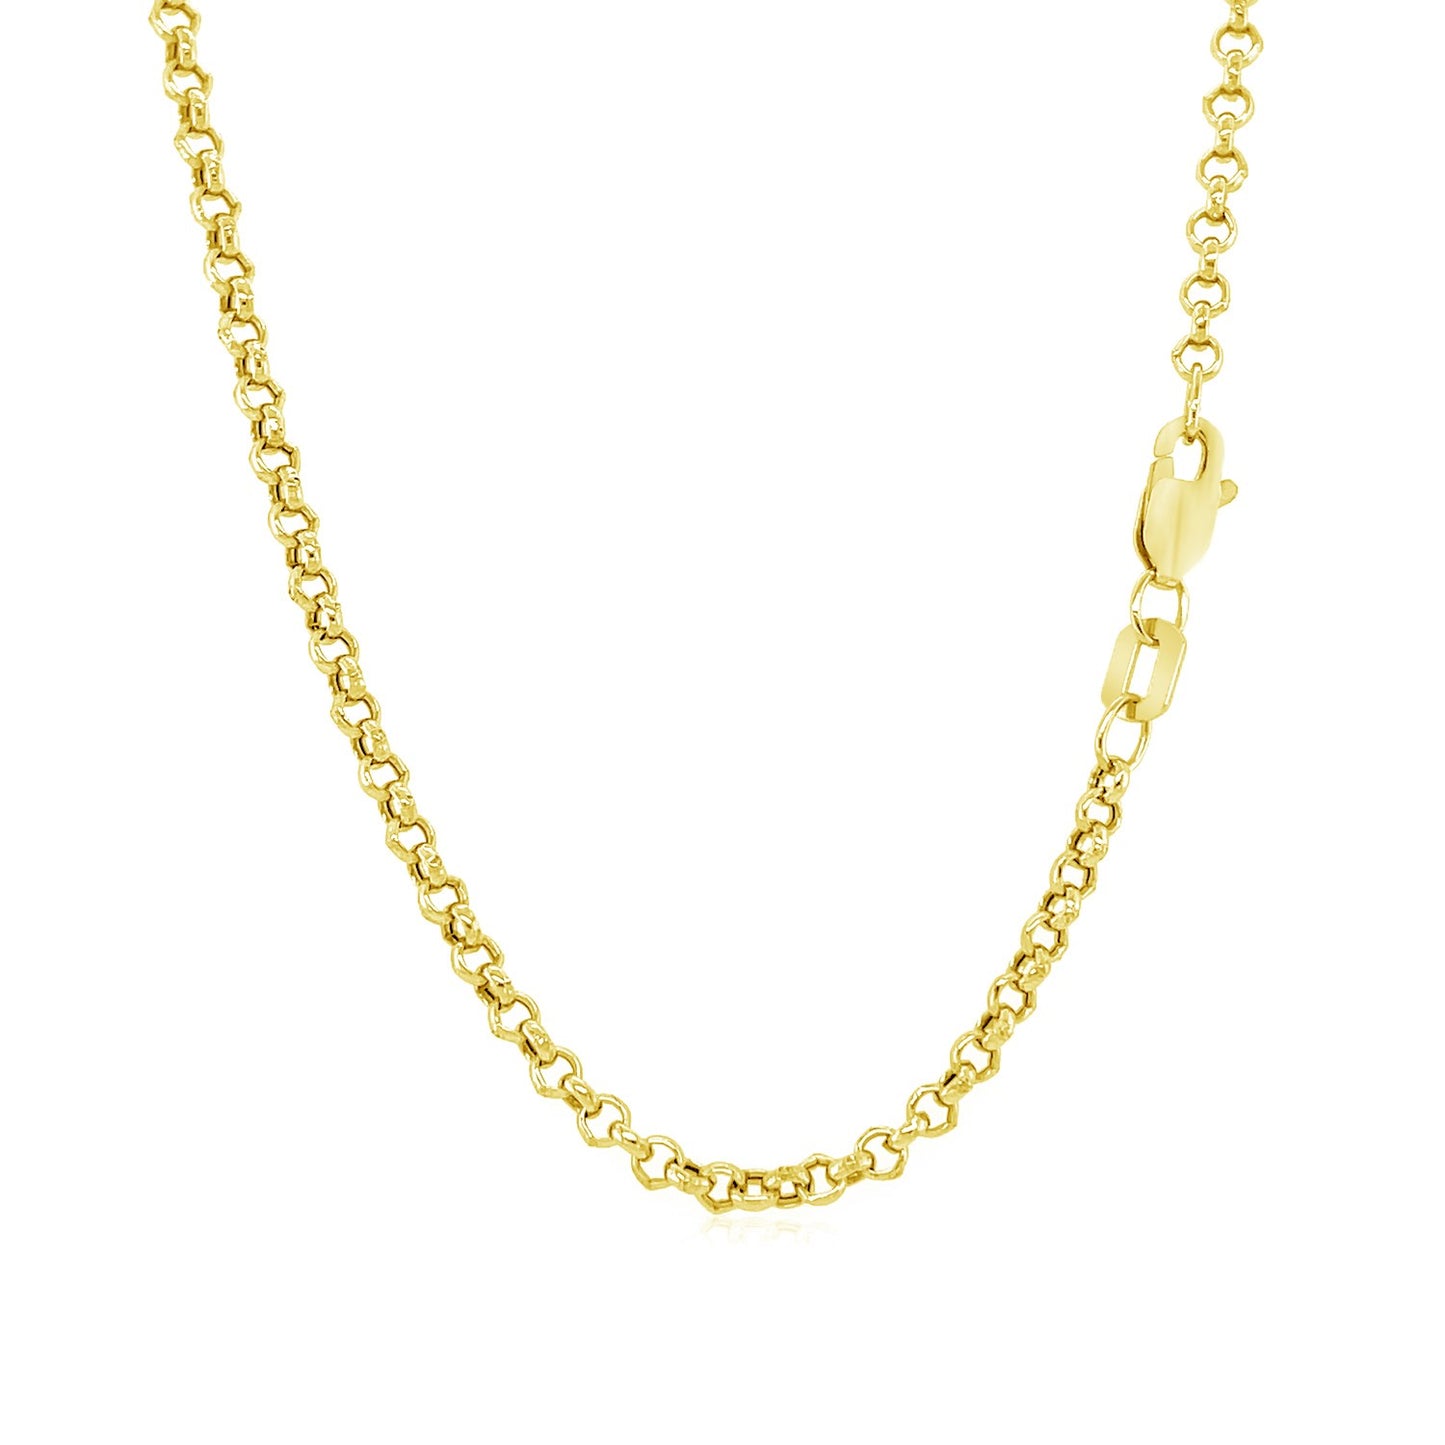 2.3mm 10k Yellow Gold Rolo Chain